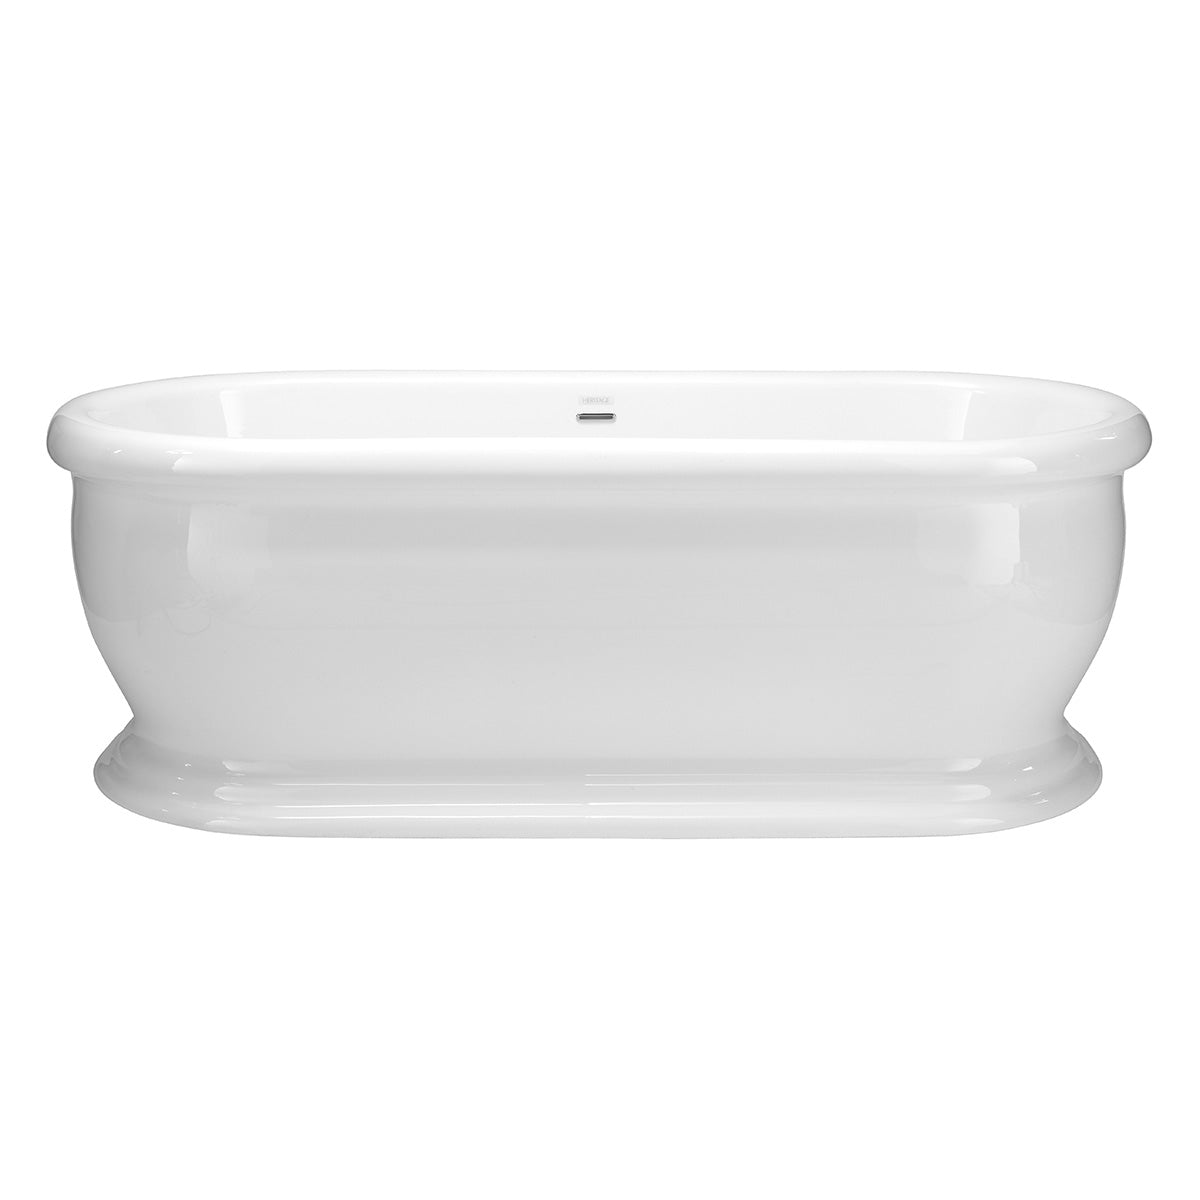 Heritage Derrymore Roll Top Freestanding Double Ended Acrylic Slipper Bath 1745x790mm White Gloss Lifestyle